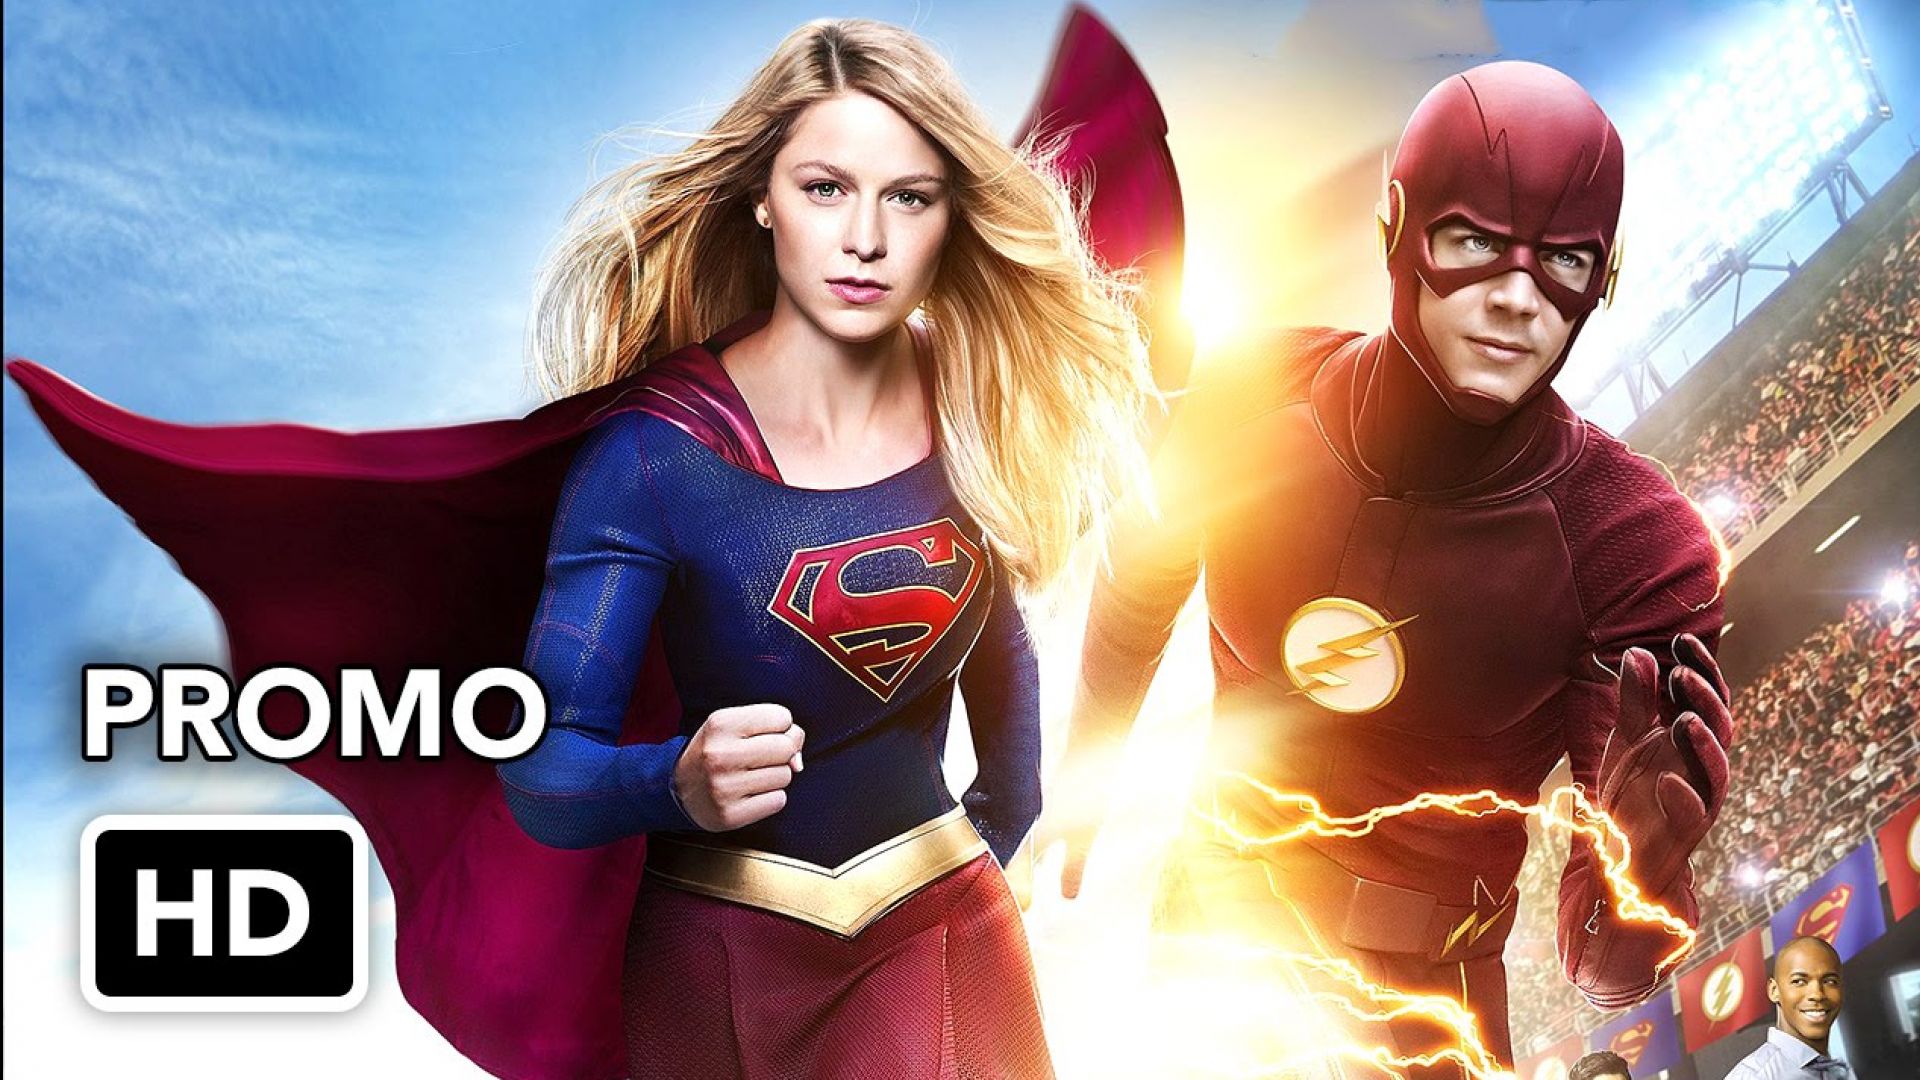 Extended trailer for Supergirl/Flash upcoming crossover epis